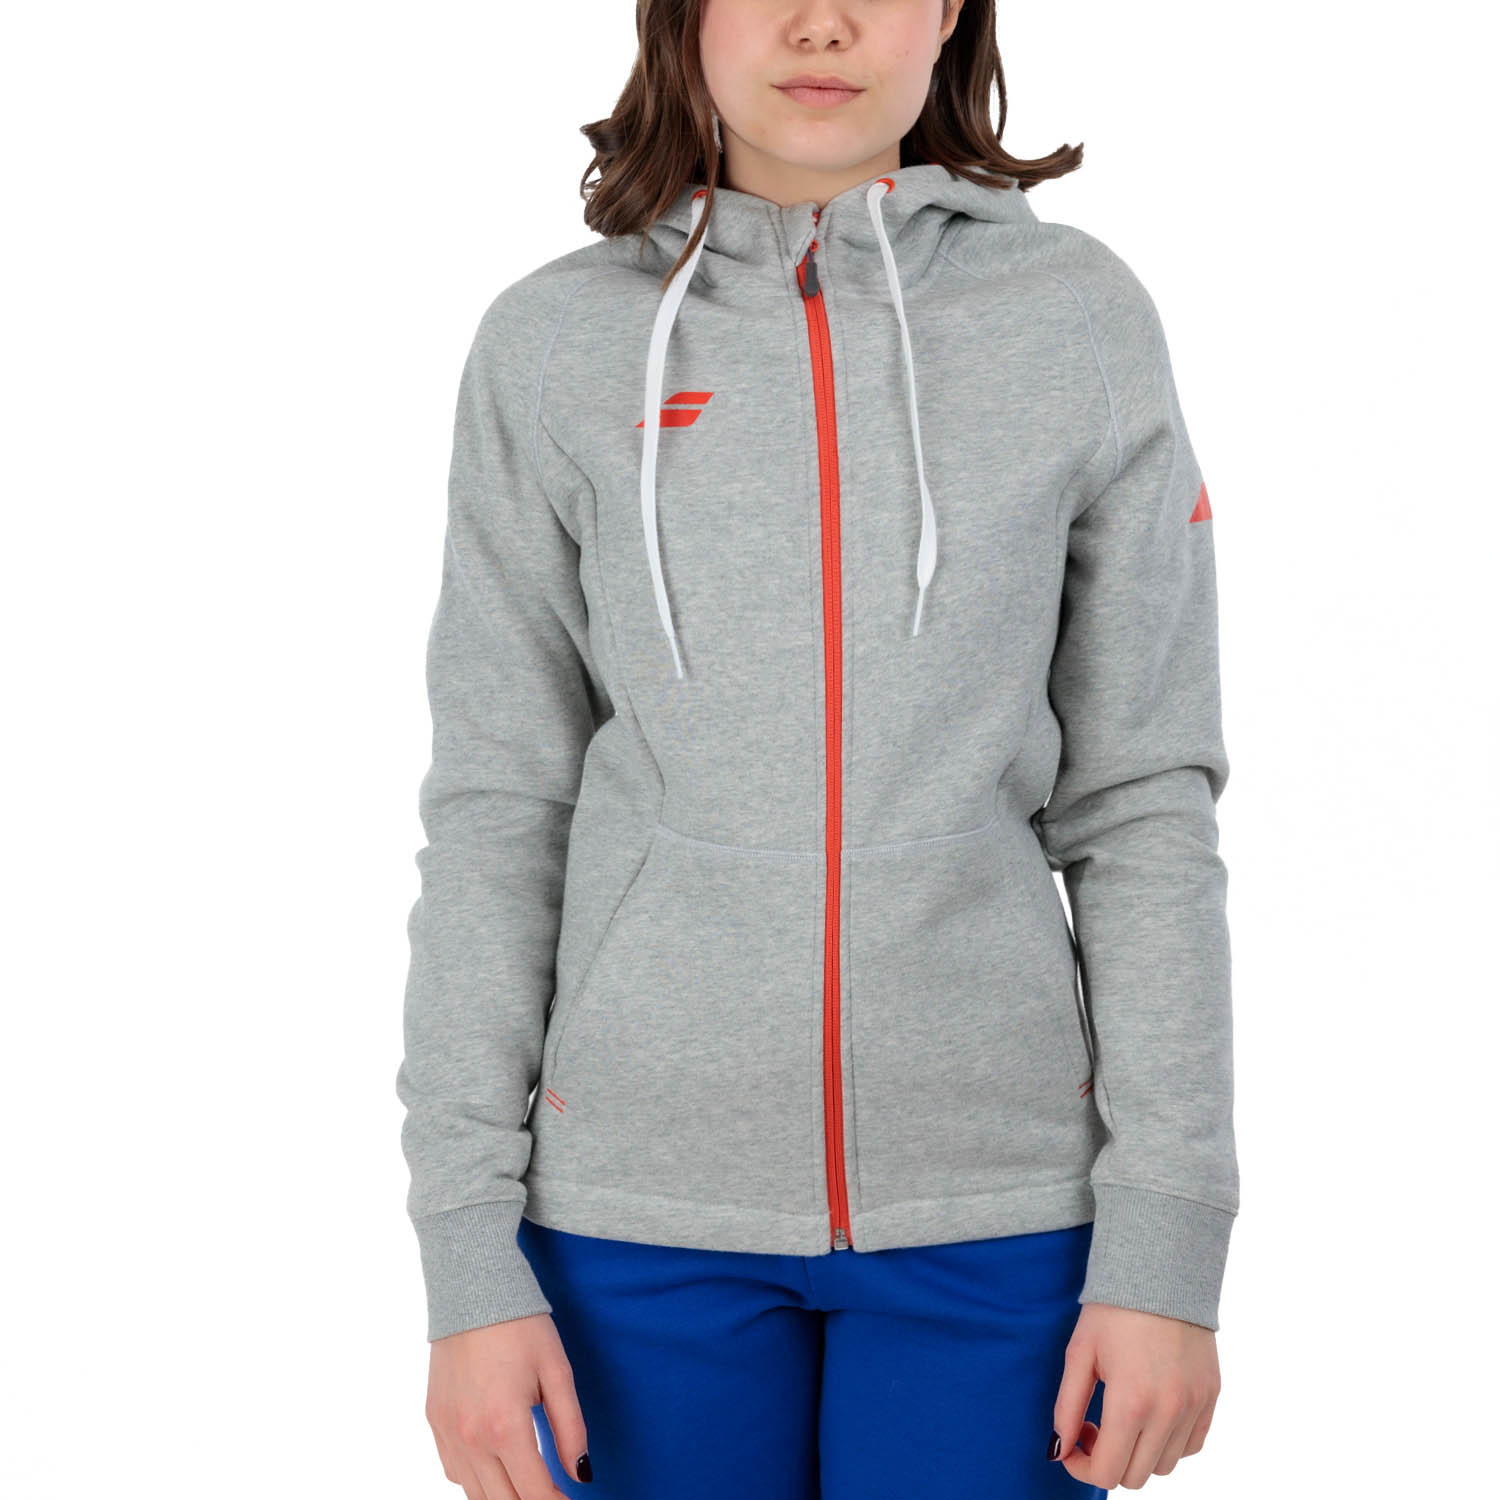 Babolat Exercise Hoodie - High Rise Heather